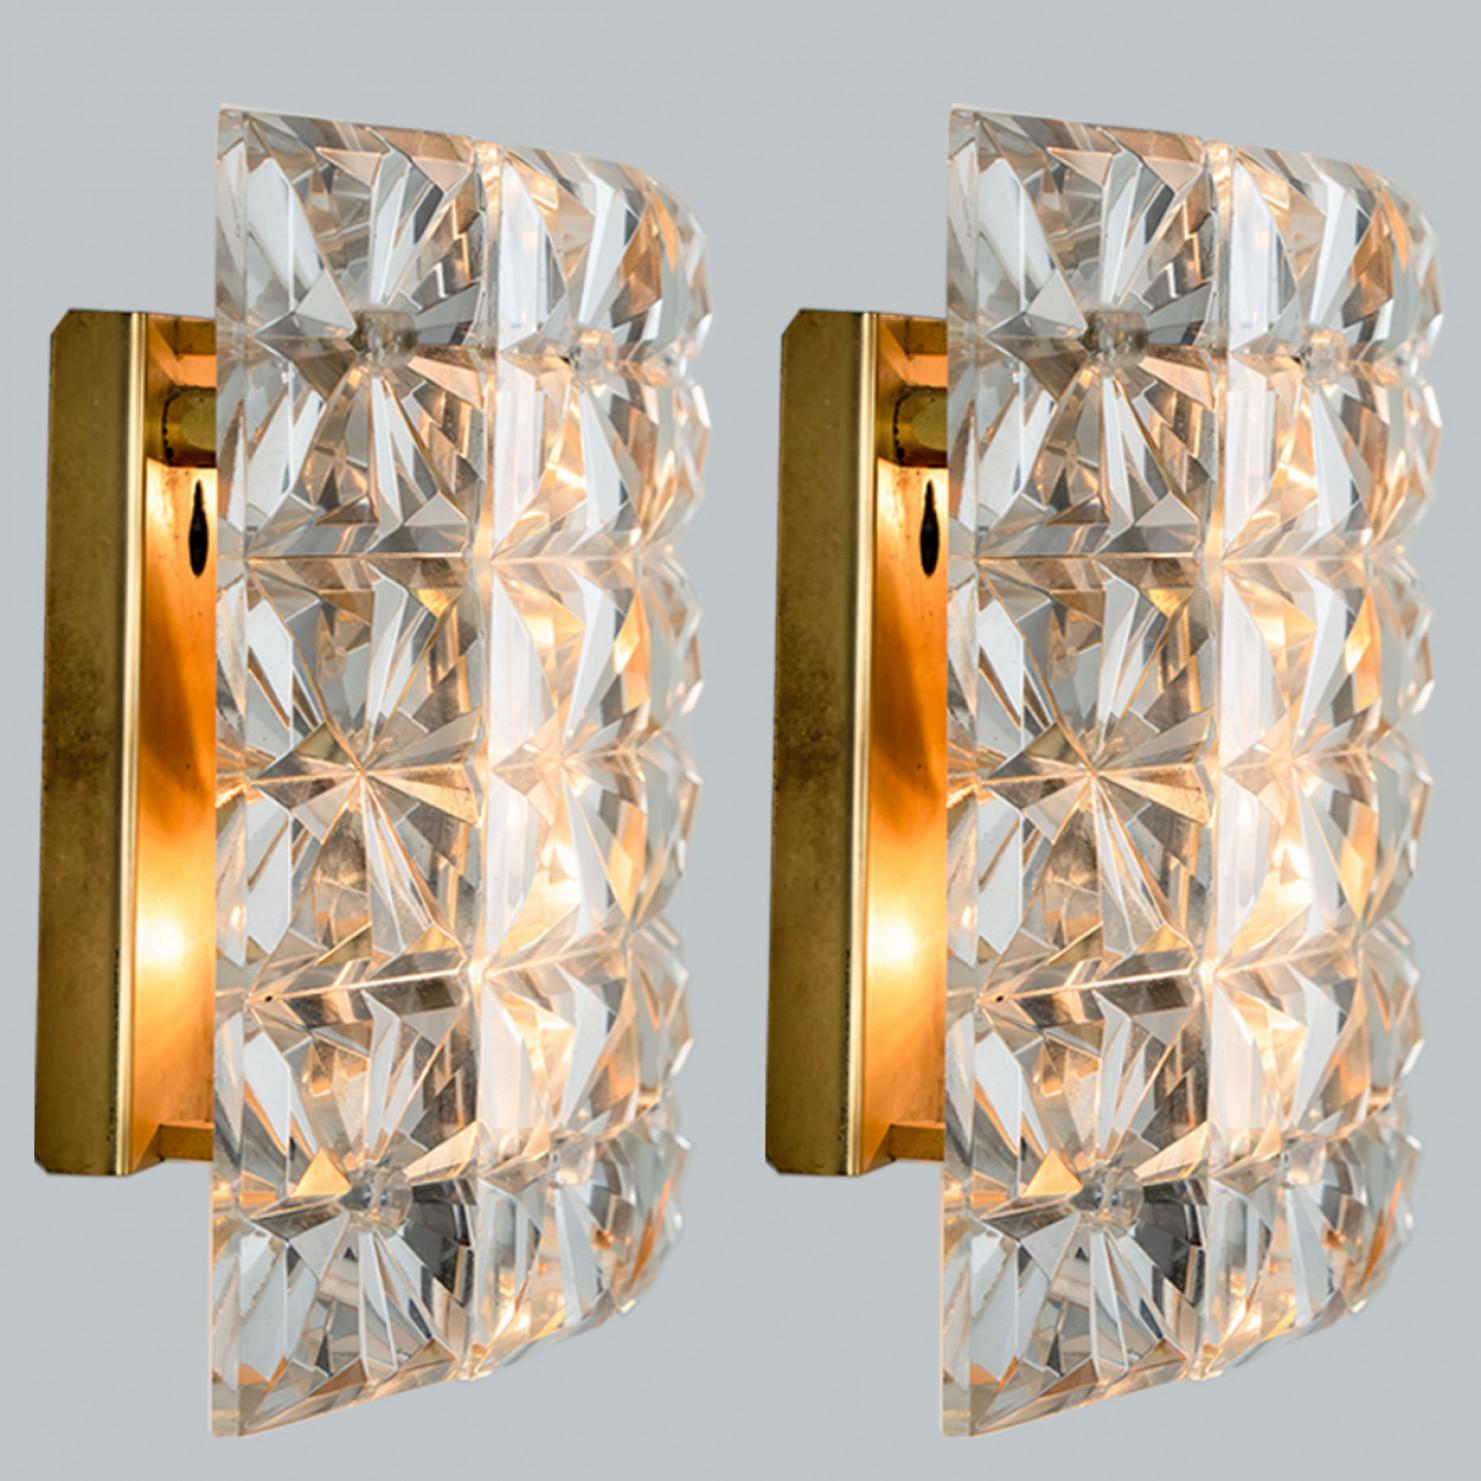 German 1 of the 3 Brass and Crystal Glass Wall Lights by Kinkeldey, 1970s For Sale